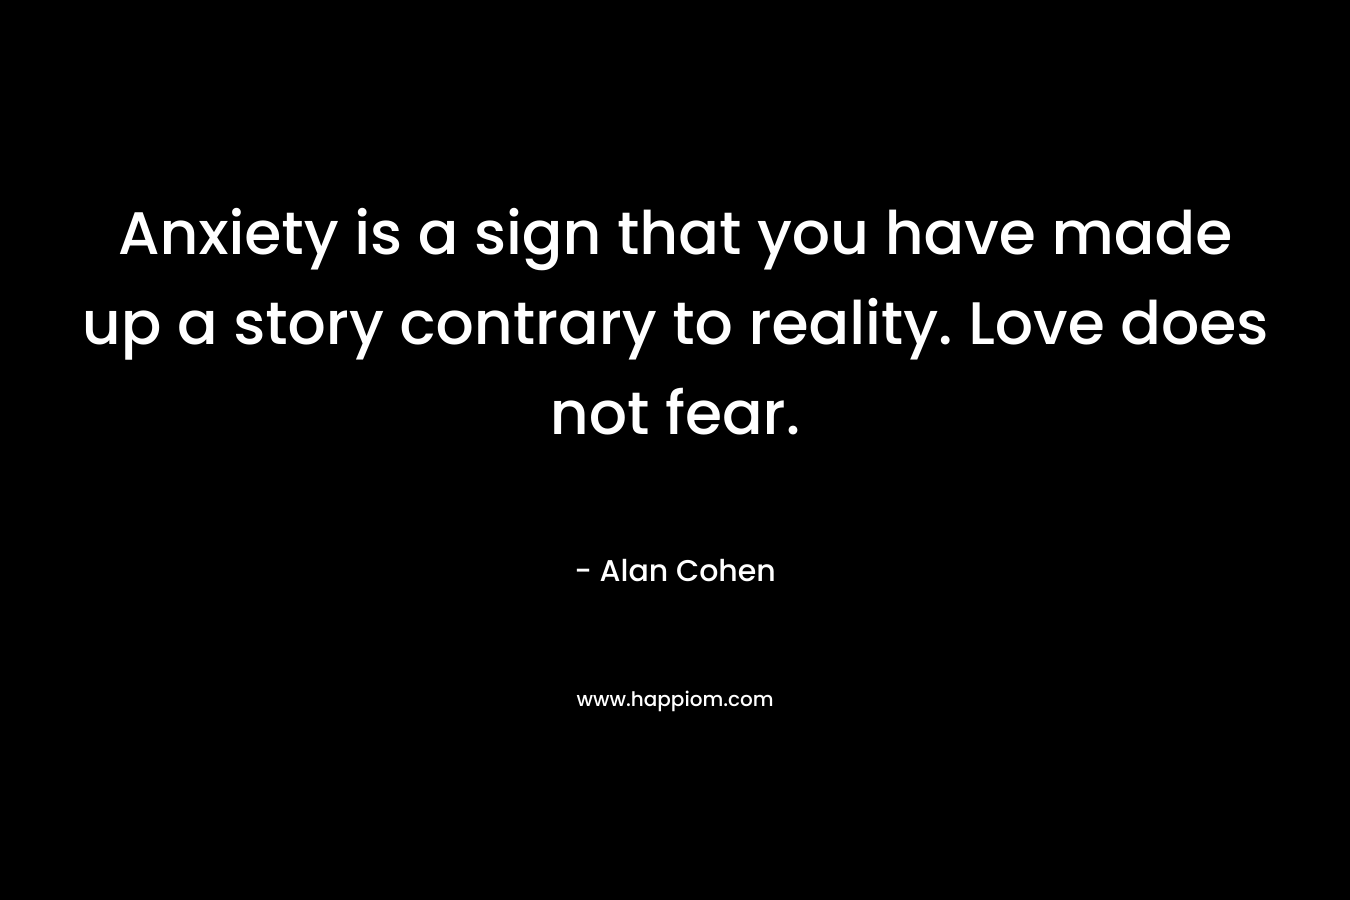 Anxiety is a sign that you have made up a story contrary to reality. Love does not fear.